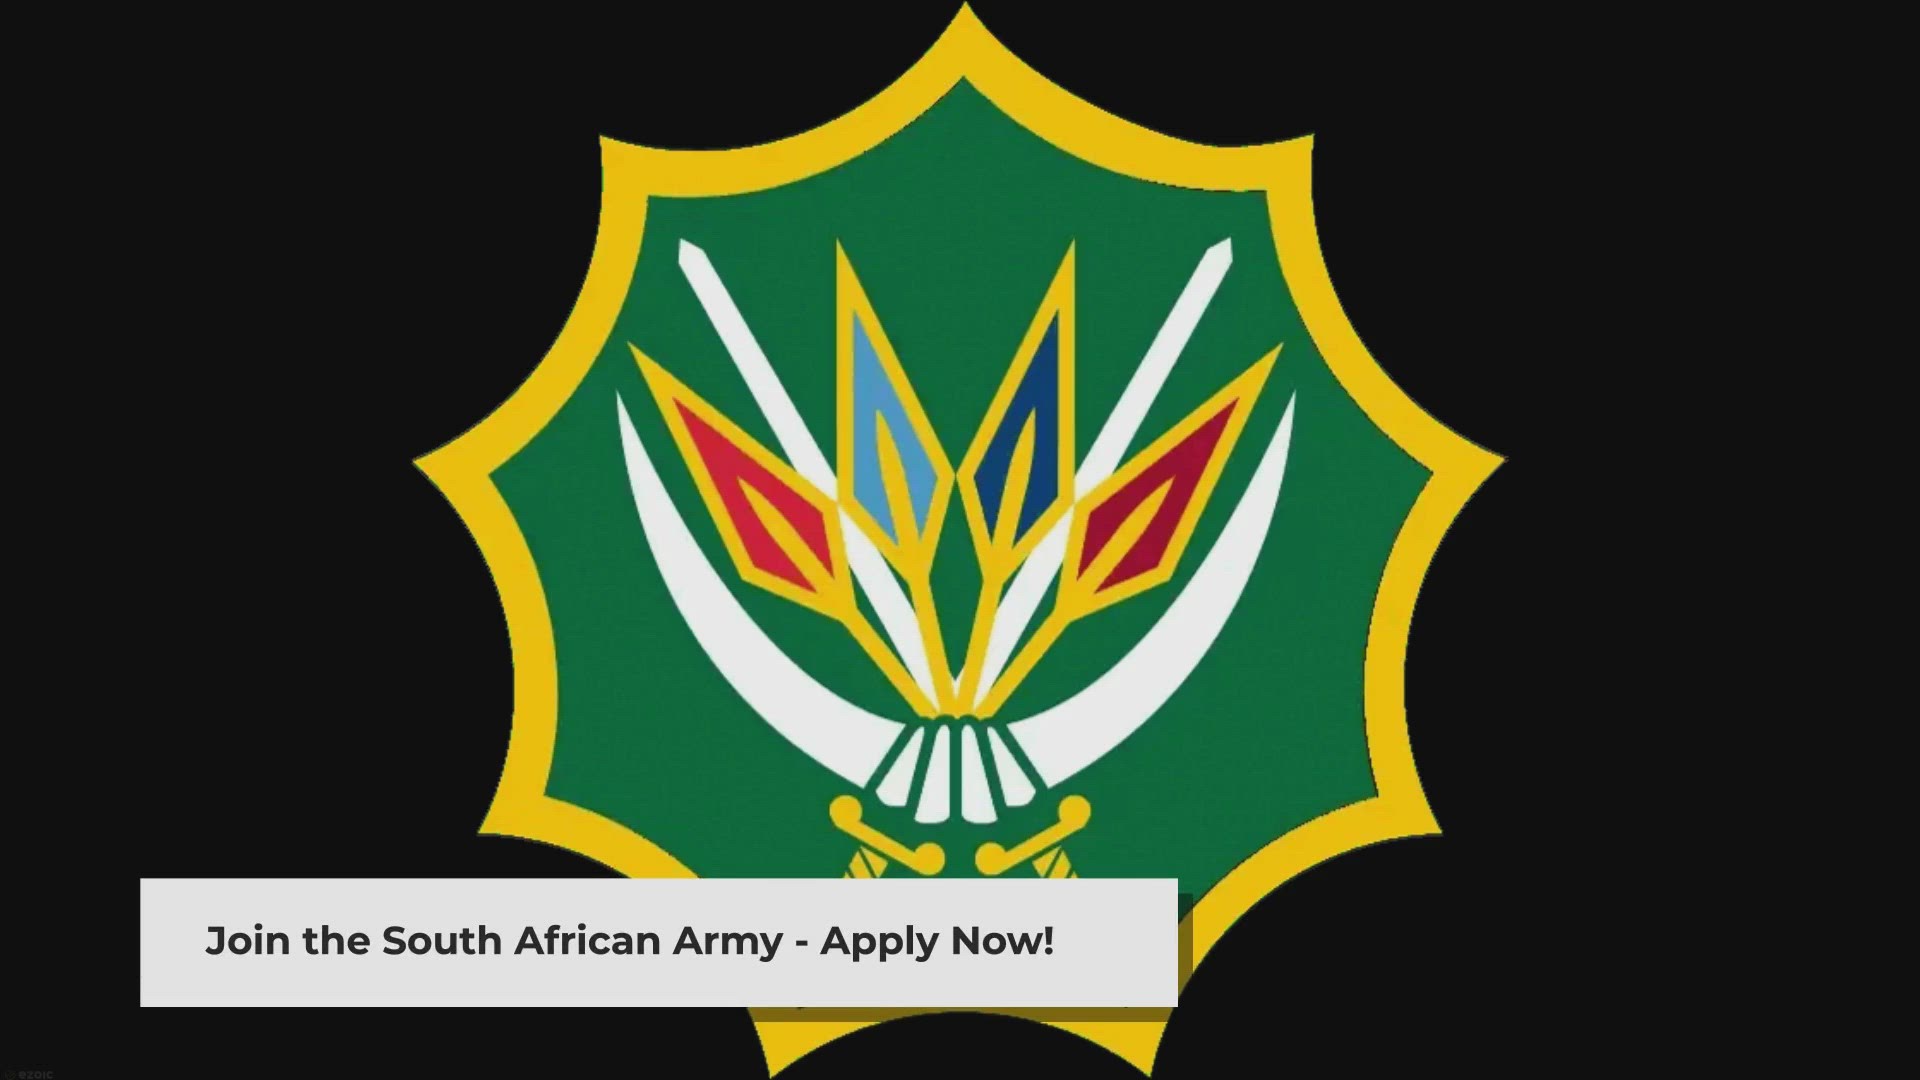 South African National Defence Force (SANDF)